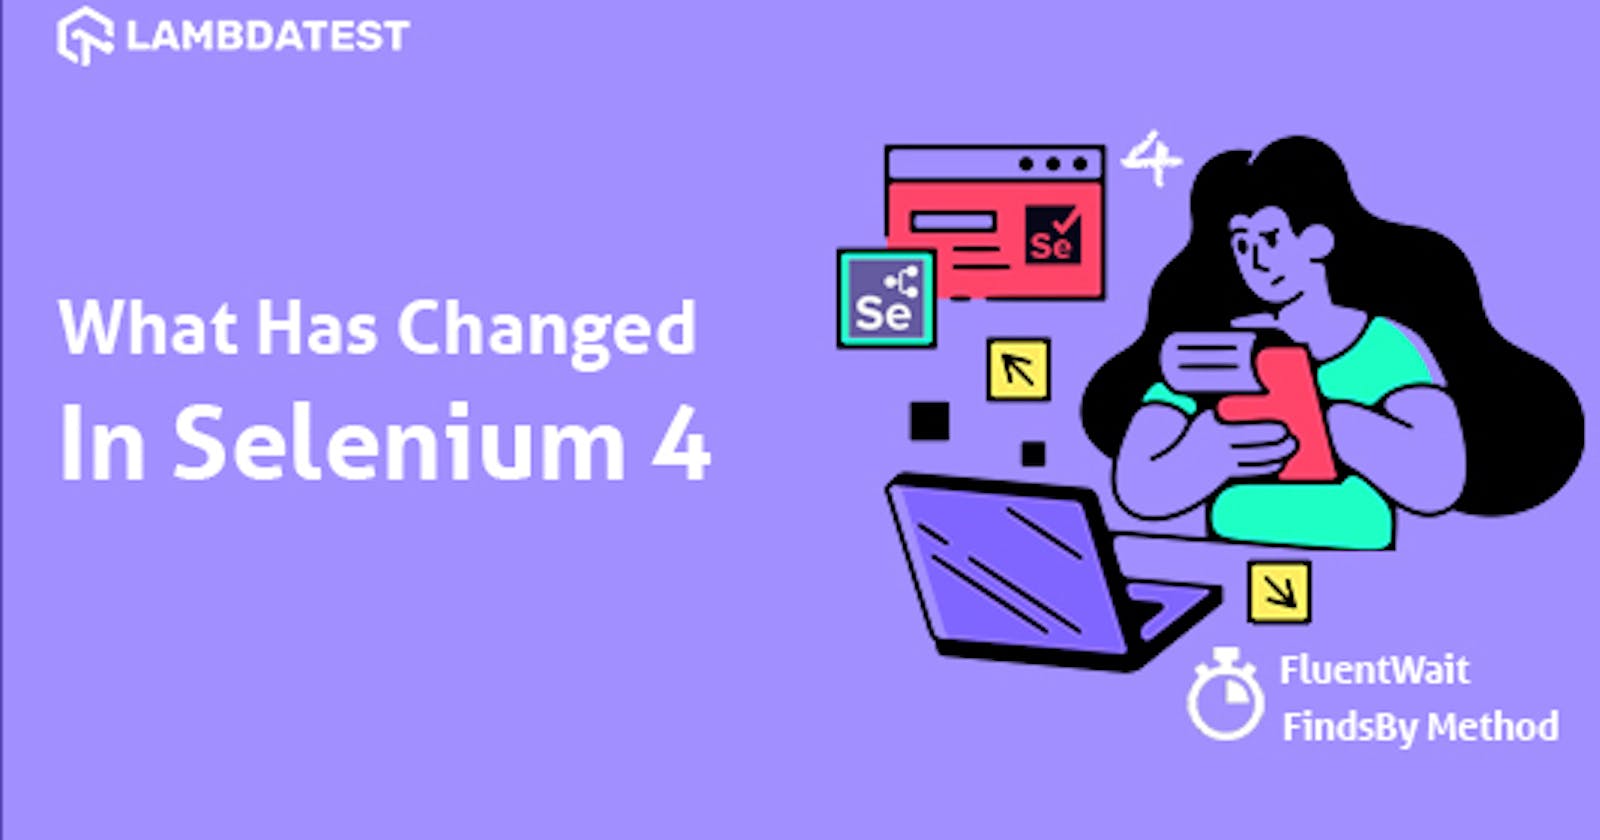 What Is New In Selenium 4 And What Is Deprecated In It?